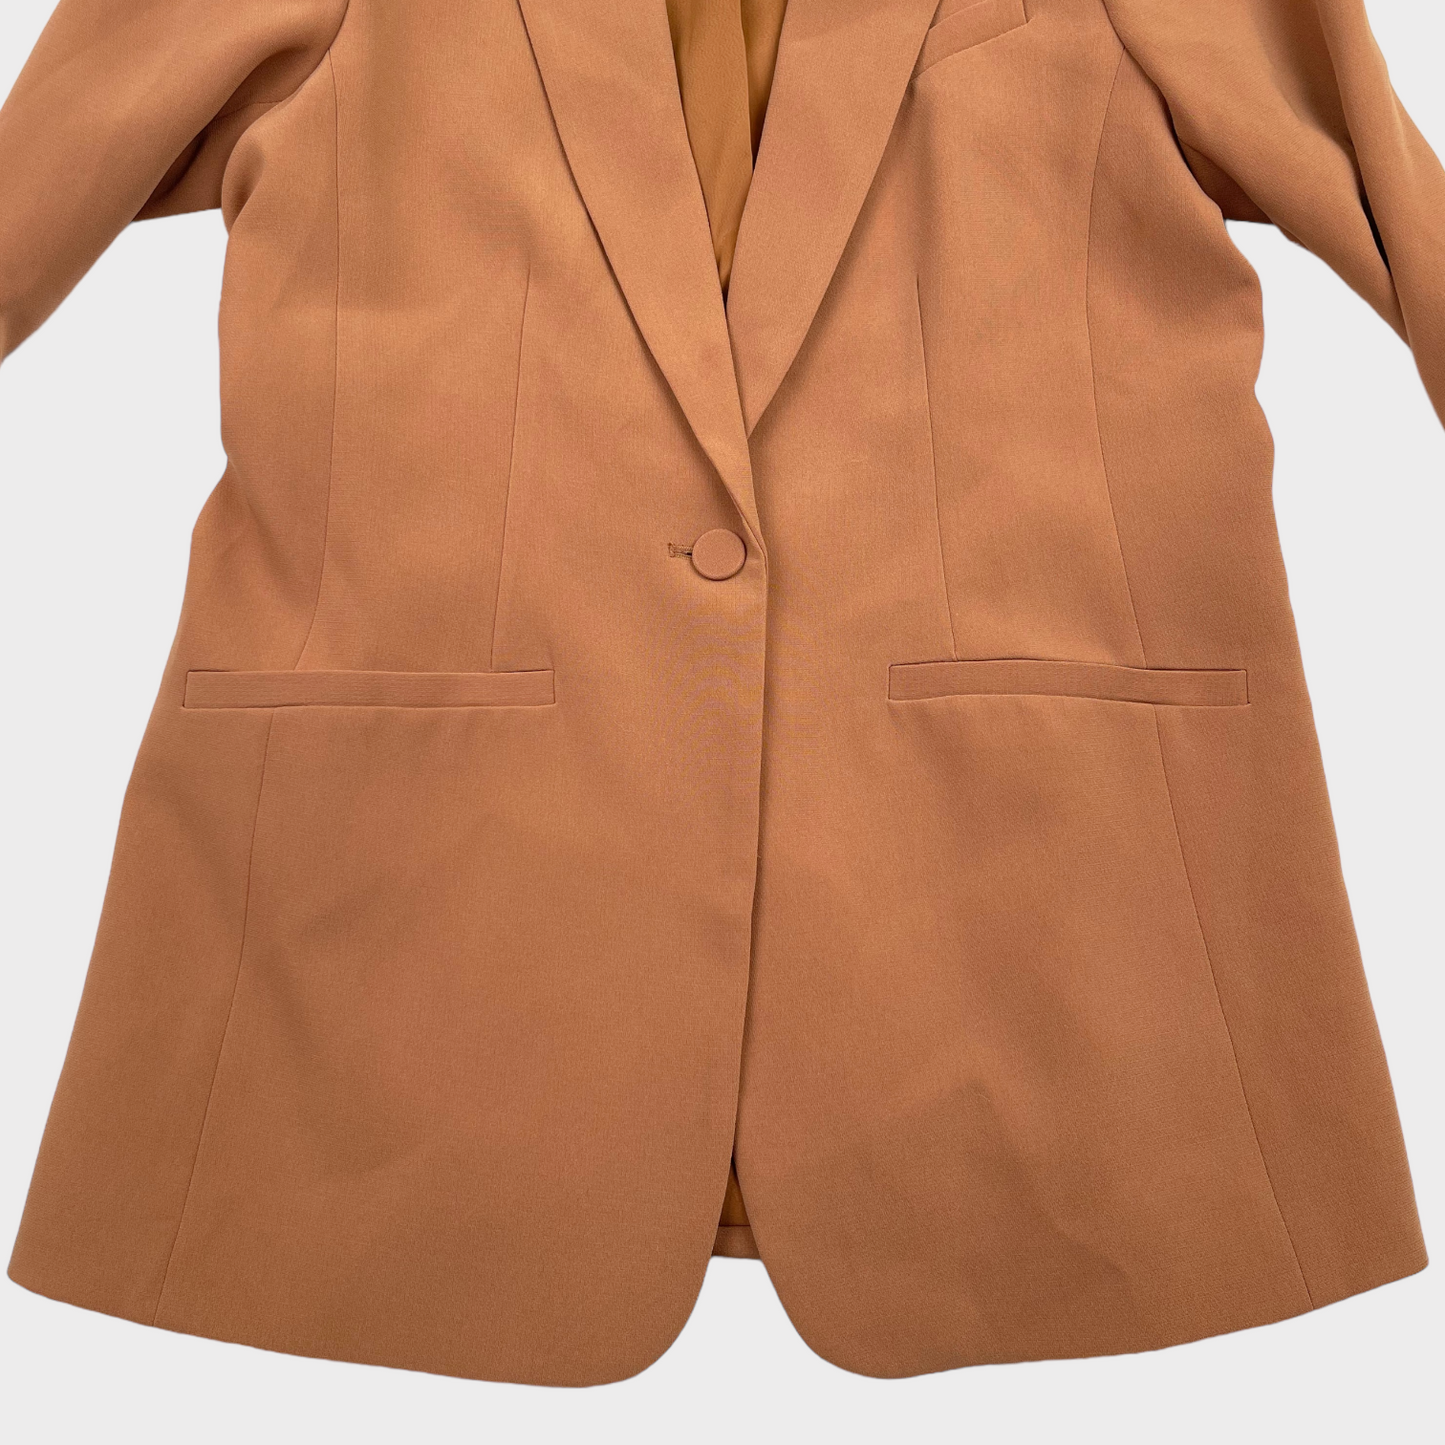 Cinq a Sept Khloe 3/4 Ruched Sleeve Blazer Jacket in Cinnamon Women's Size 4